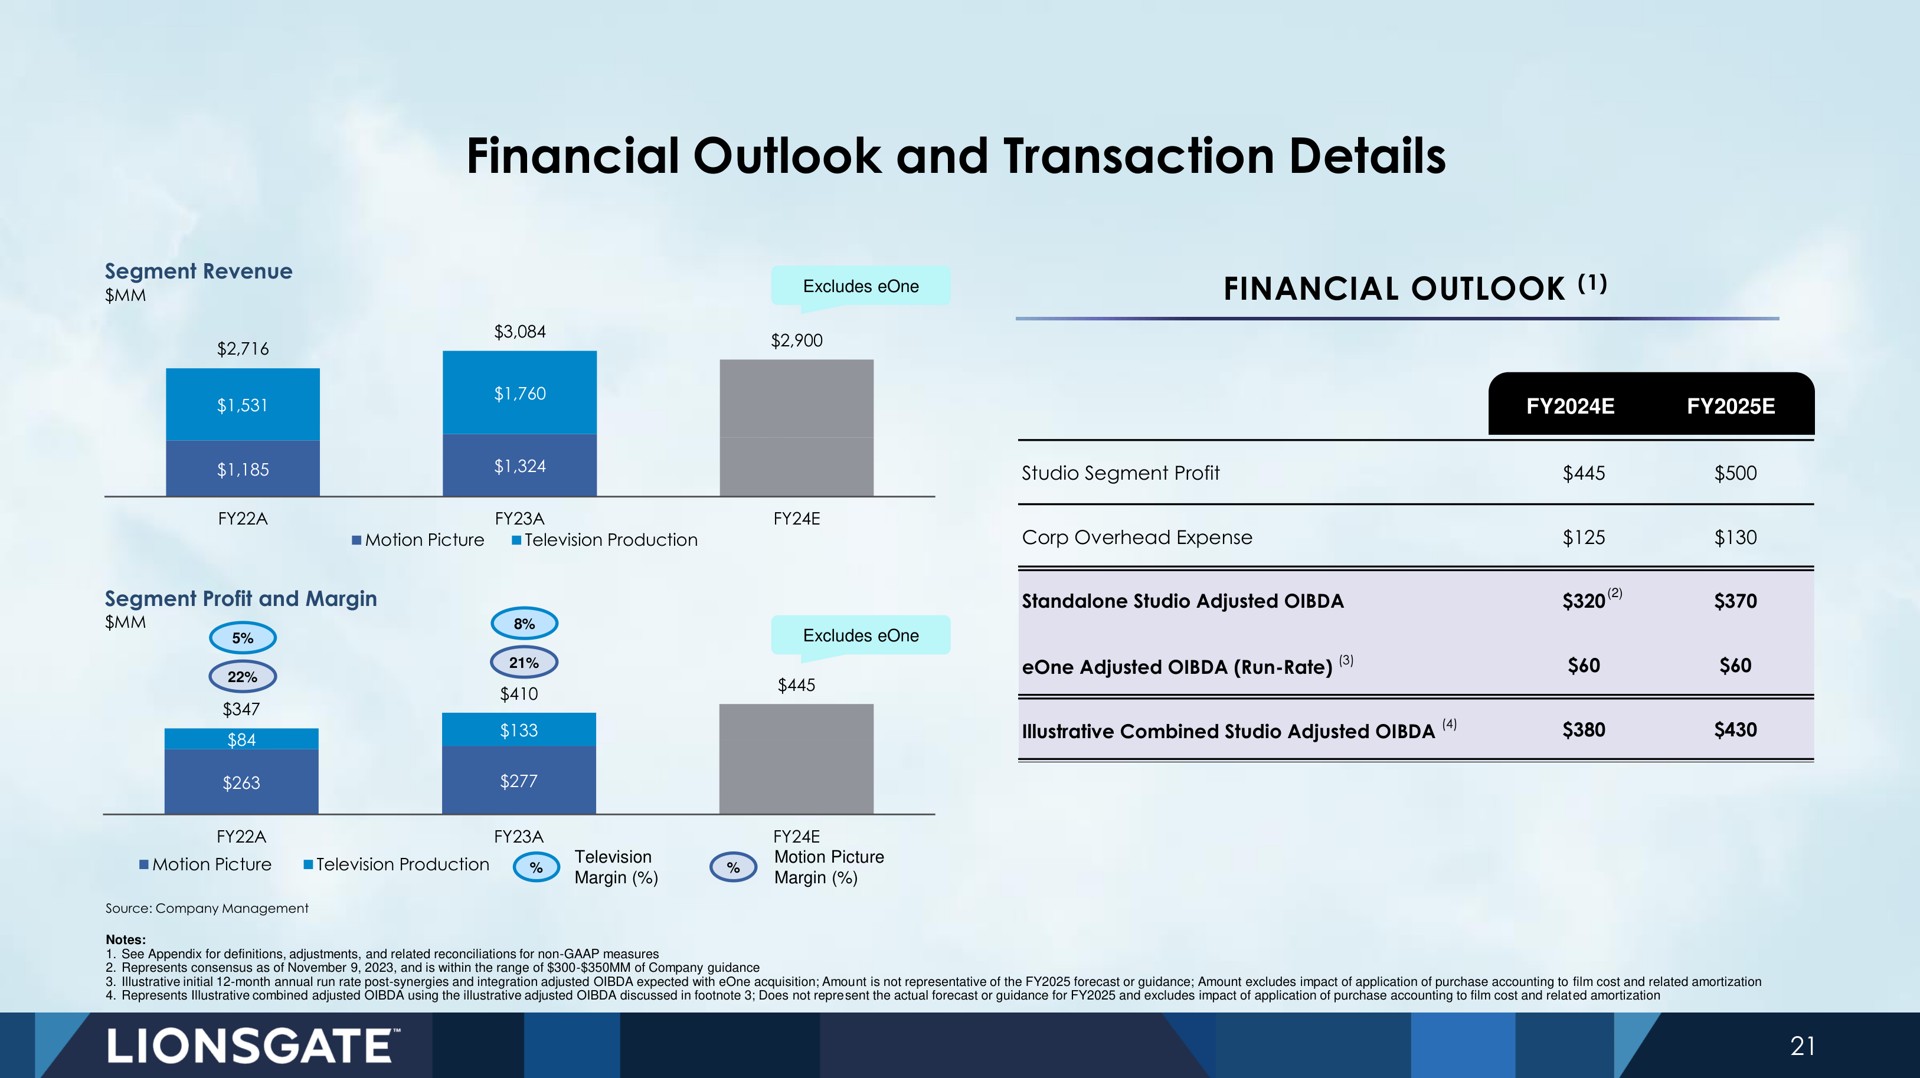 financial outlook and transaction details | Lionsgate